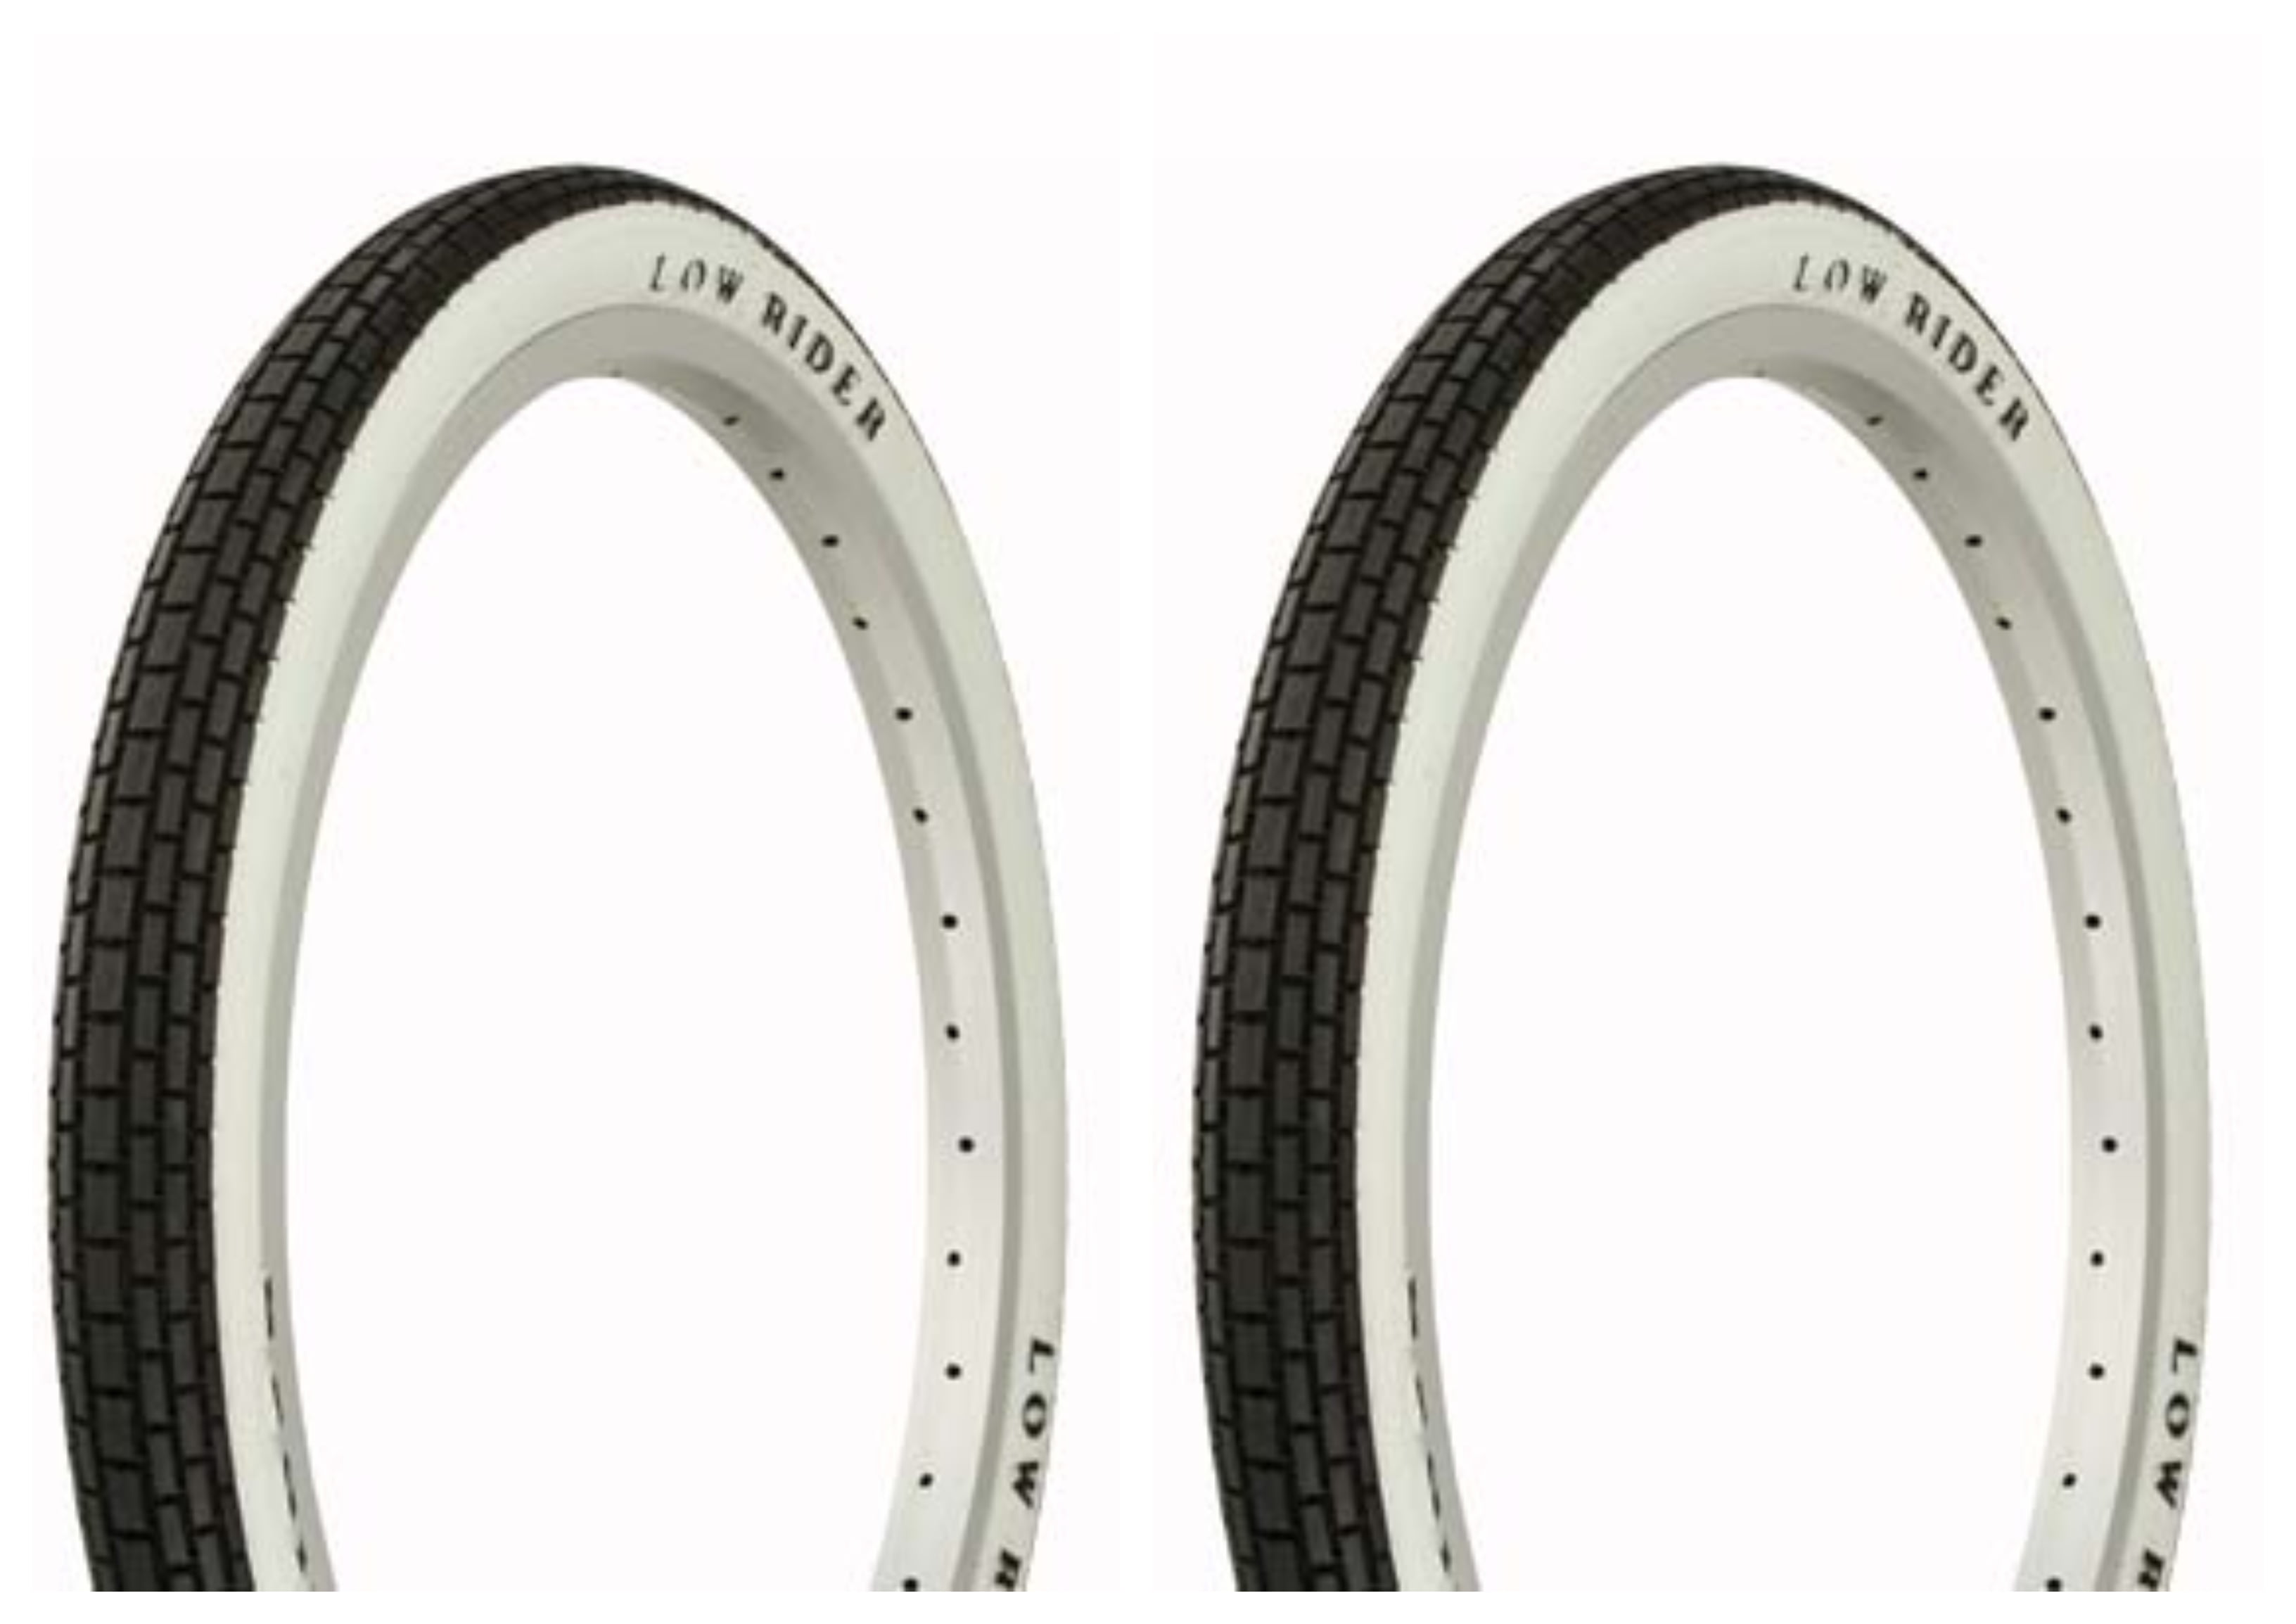 BICYCLE DURO TIRE IN 20 X 1.75 BLACK/WHITE SIDE WALL IN SLICK III STYLE! NEW 